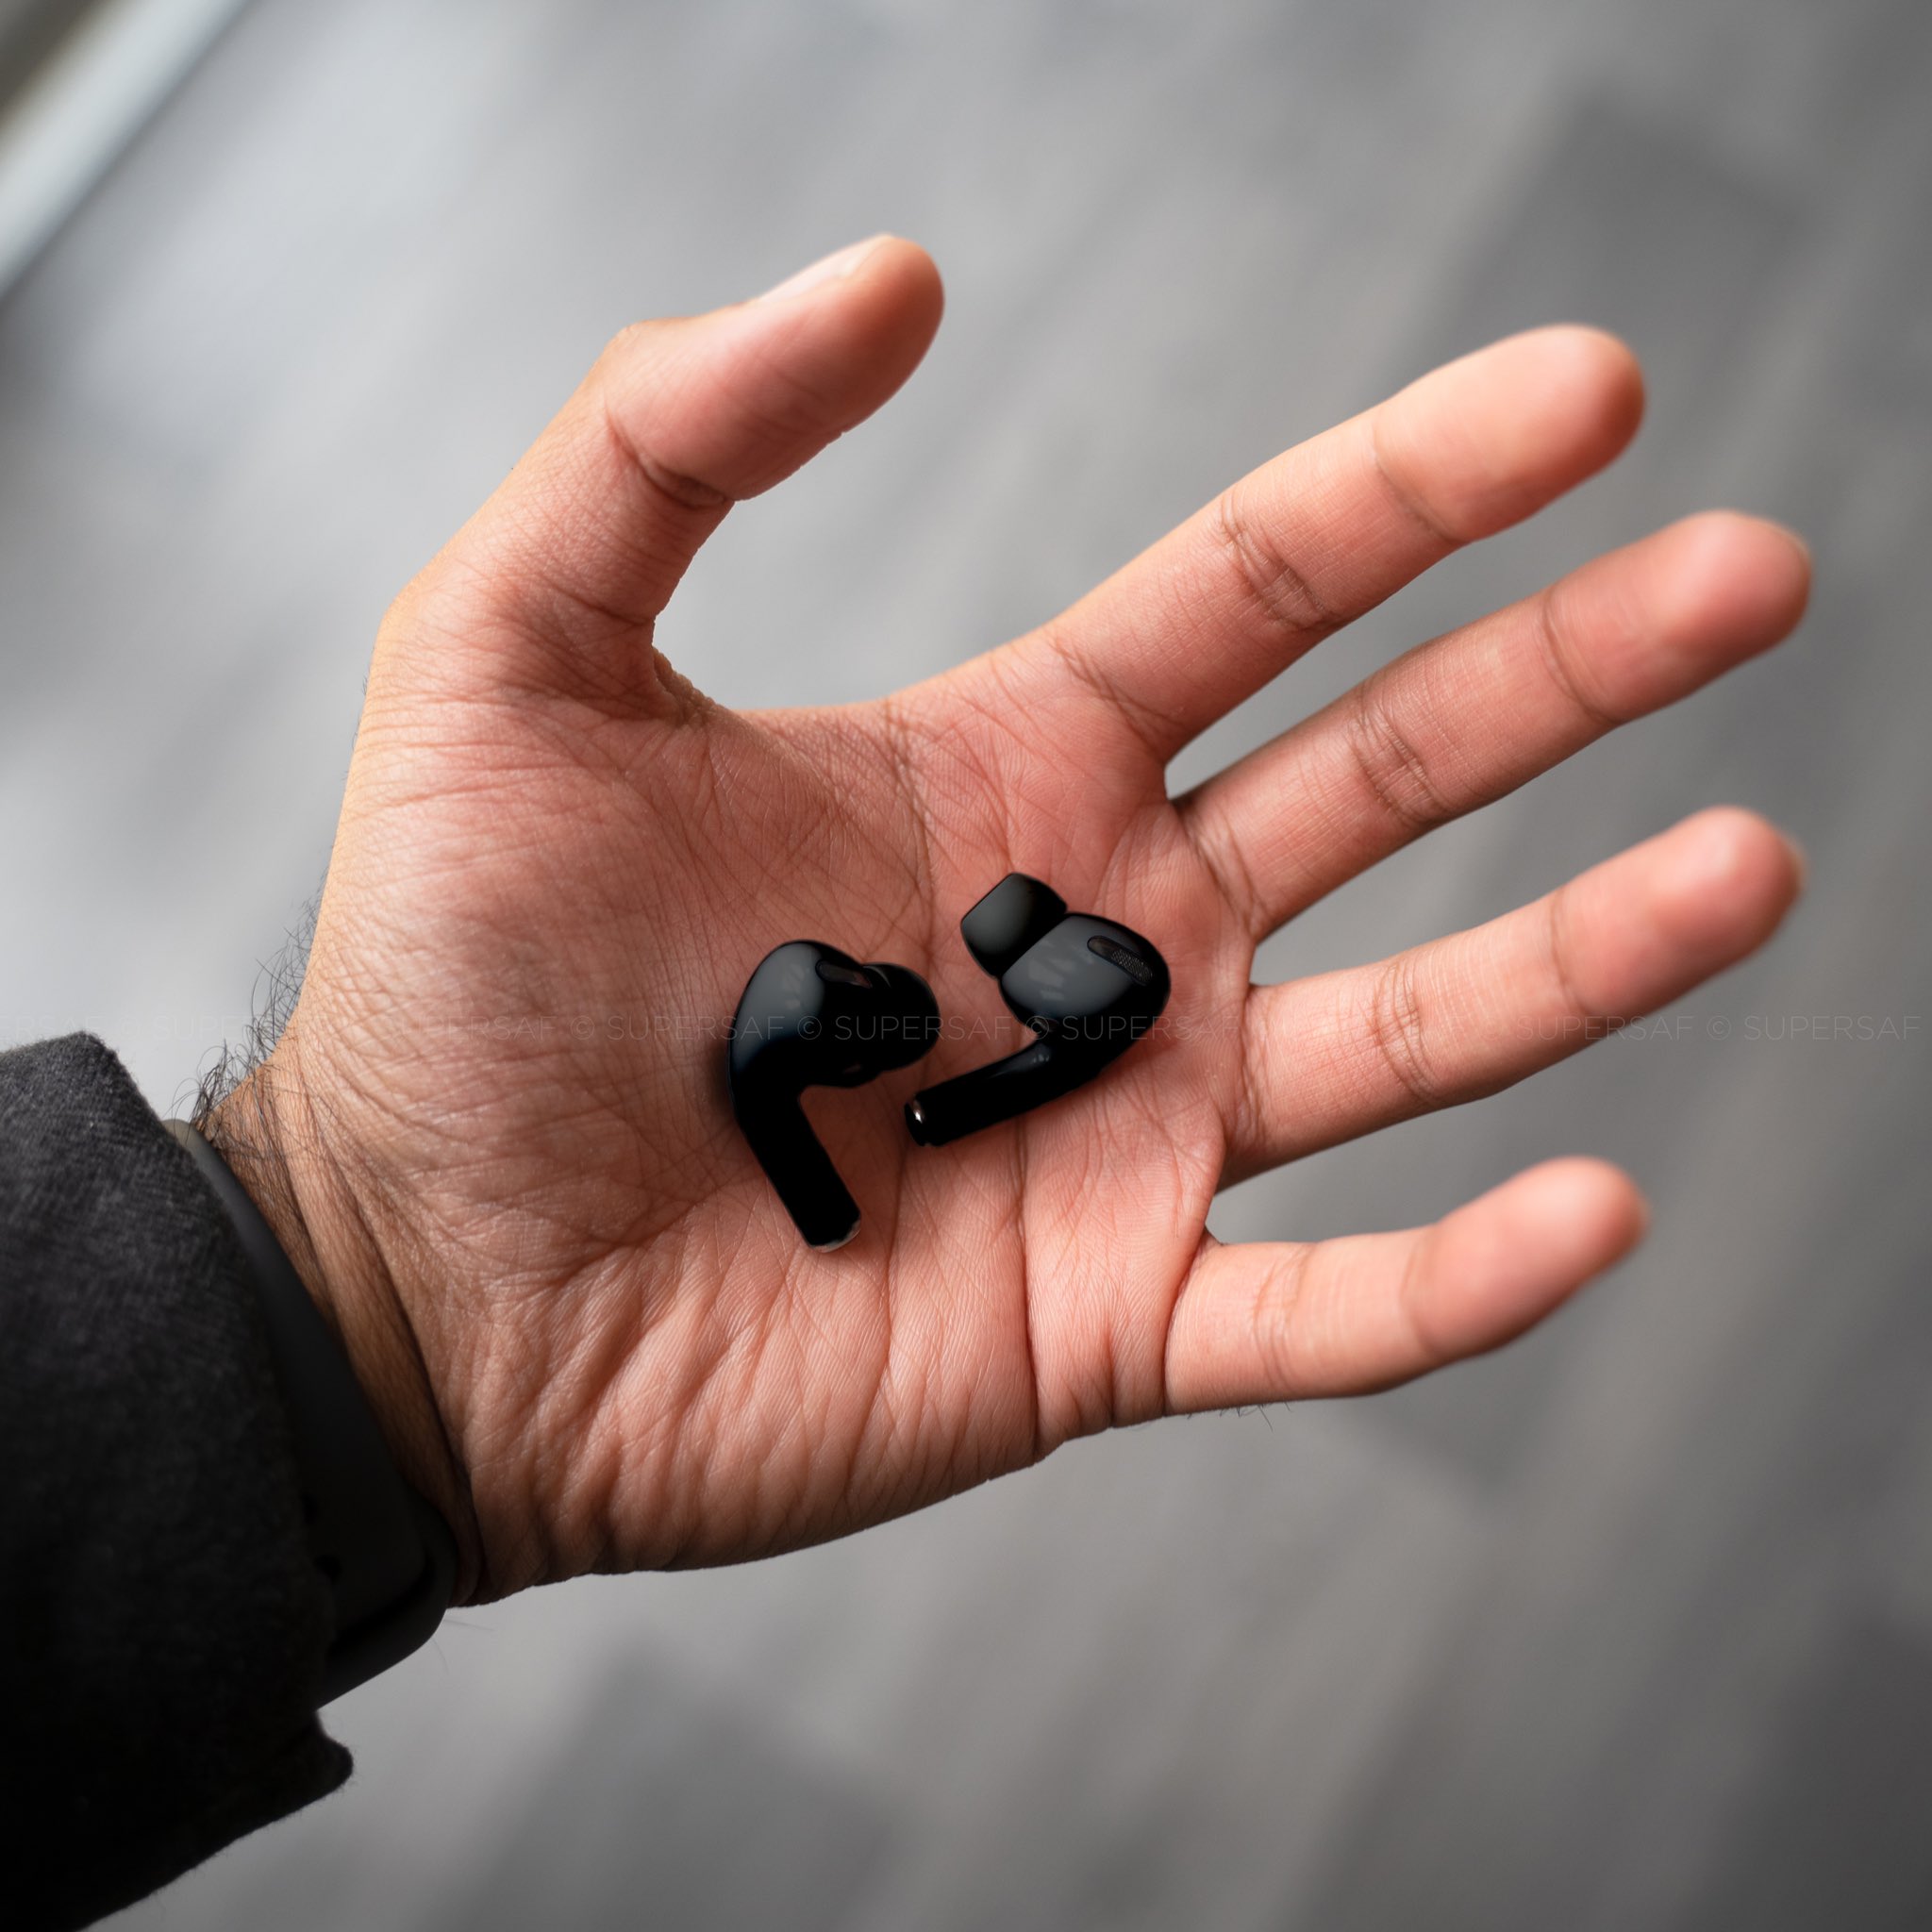 Safwan AhmedMia en Twitter: "Limited Edition Black AirPods Pro (JK, but imagine if they did them, just imagine!) #SuperSafStyle https://t.co/LKkYGMK8OC" / Twitter